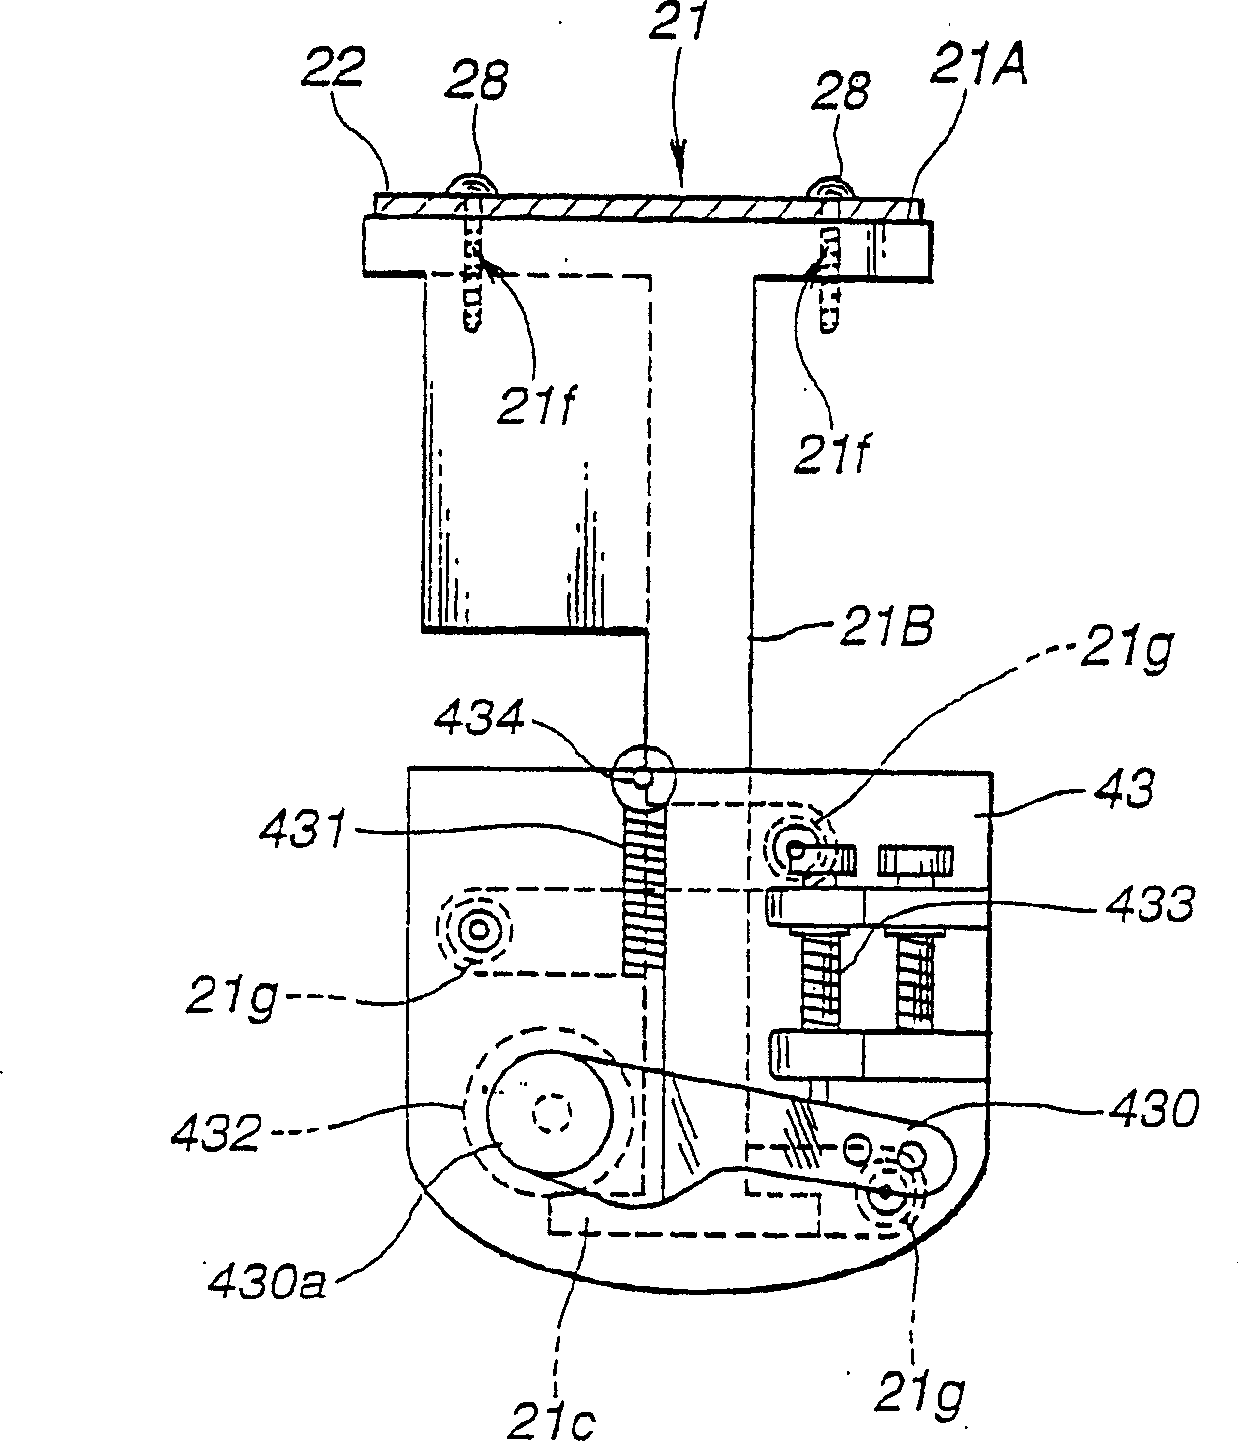 Control box device for sewing mechine